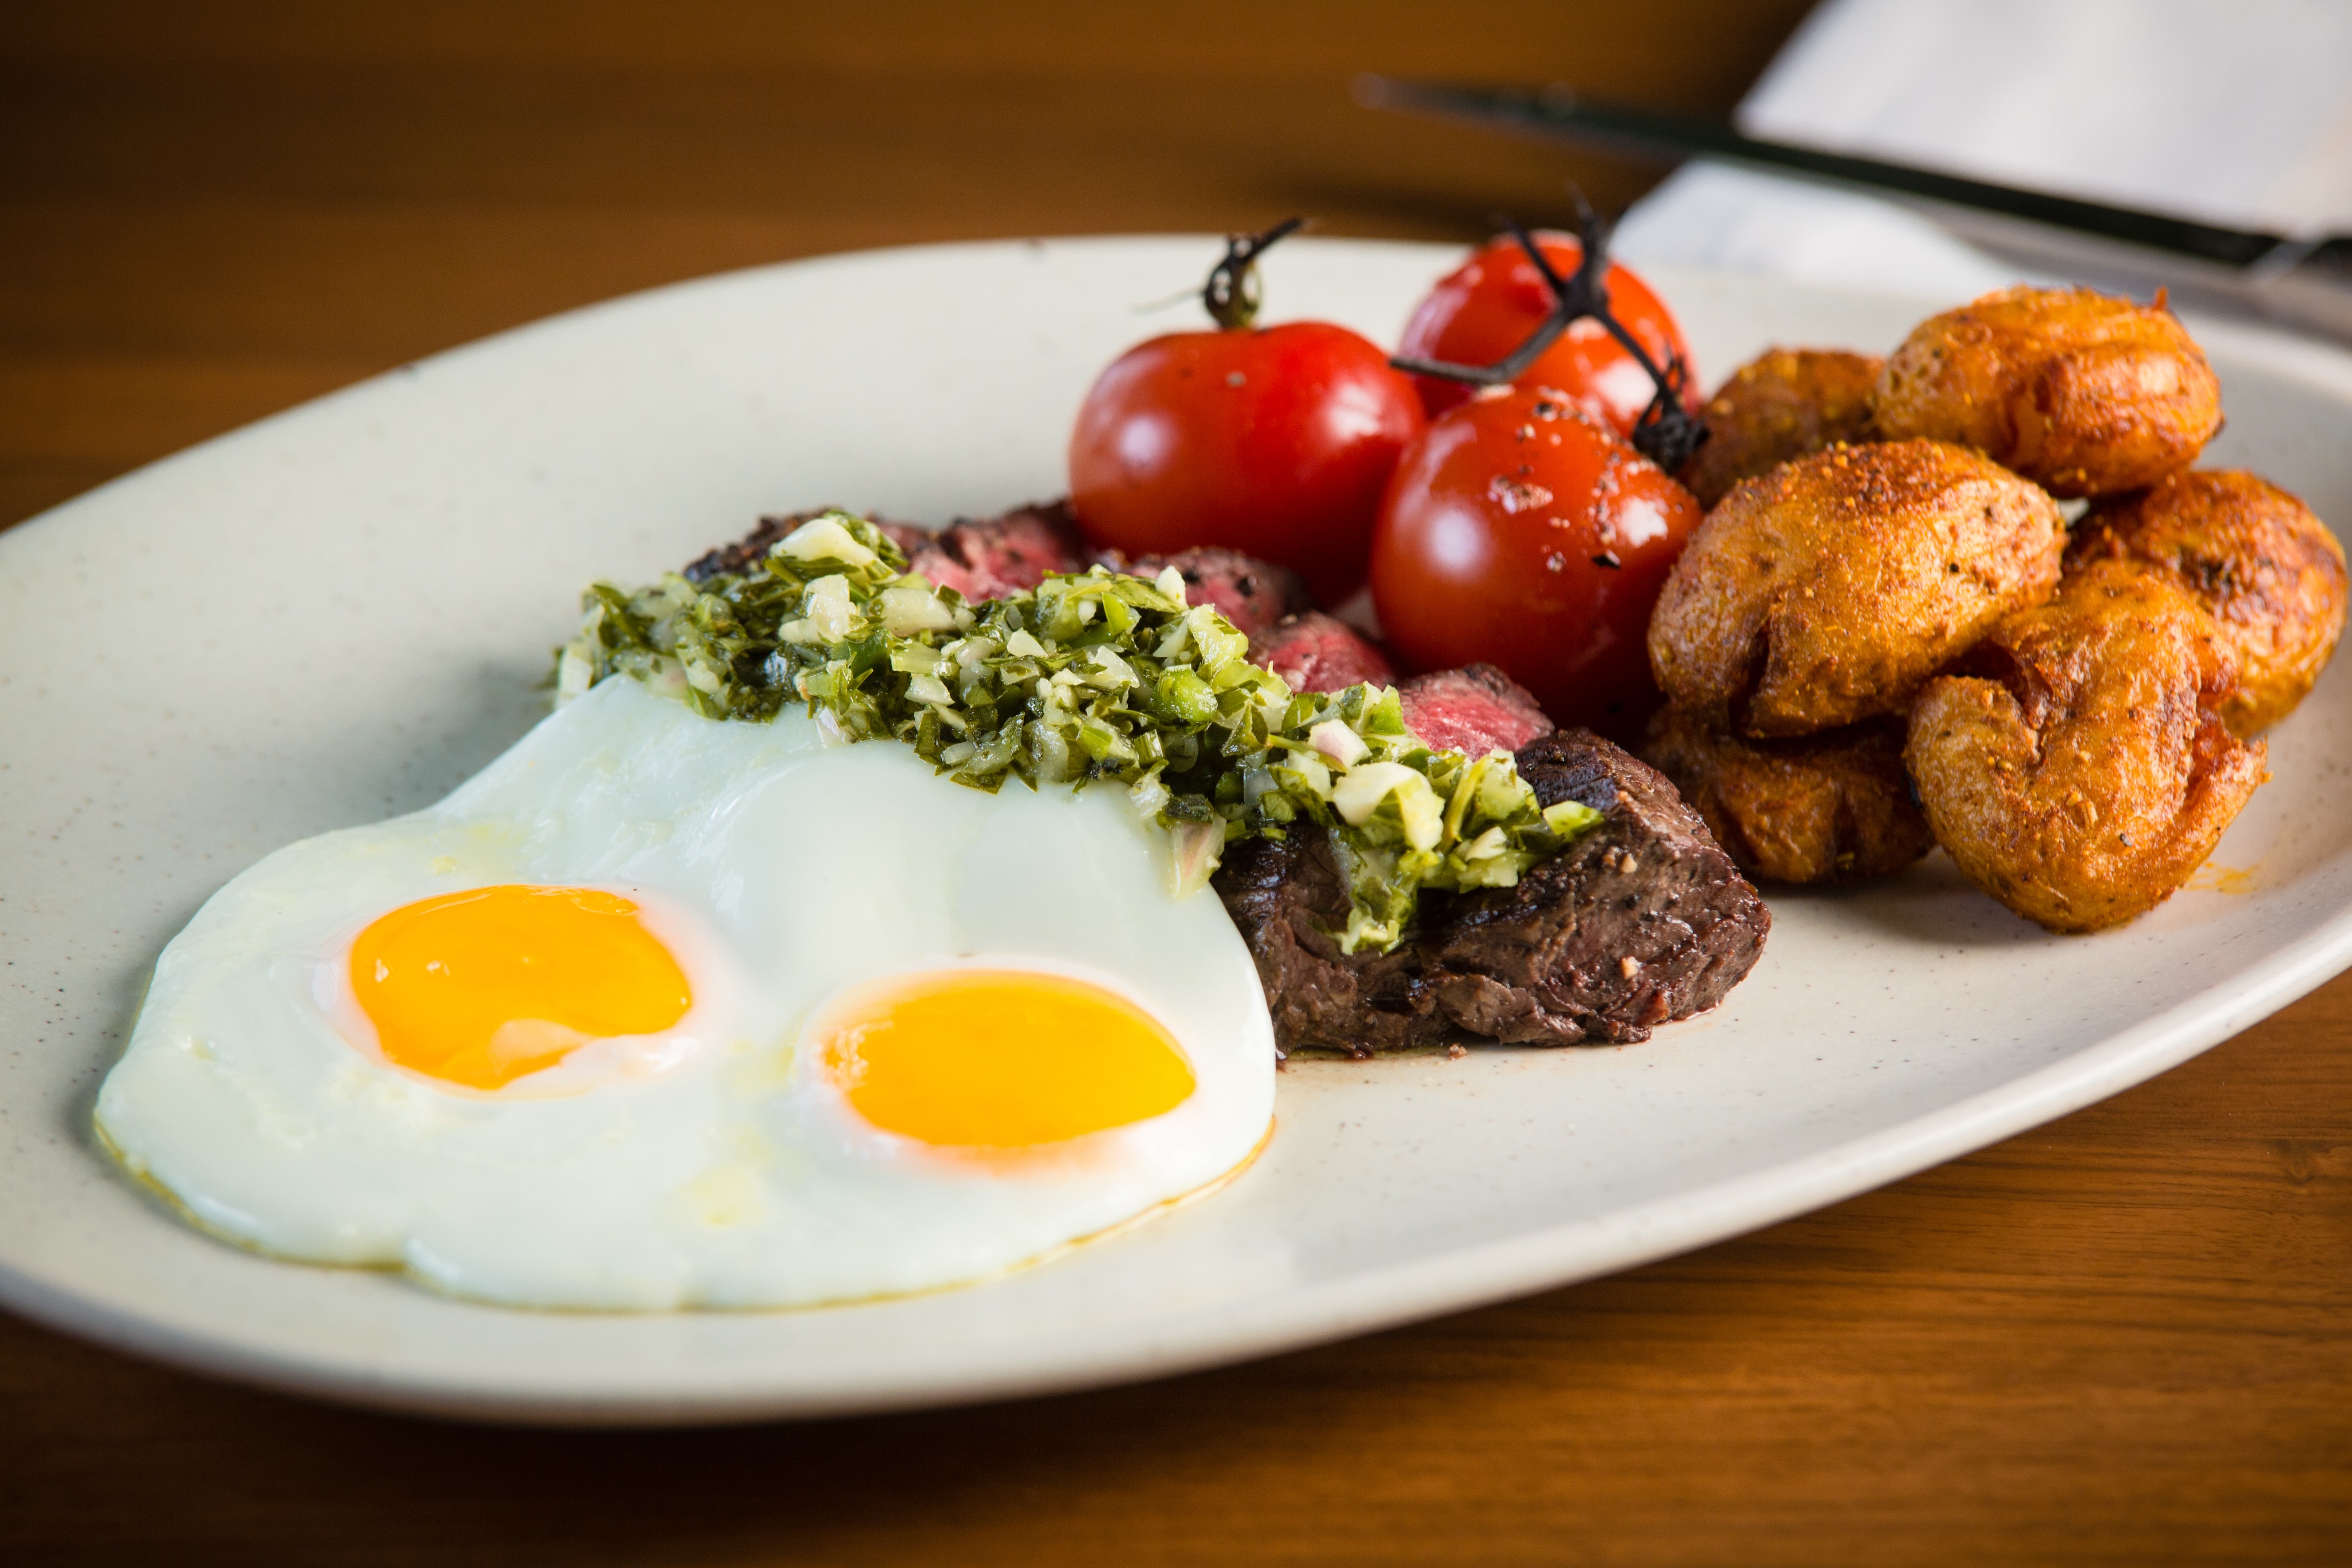 A perfect weekend brunch features a plate with two sunny-side-up eggs, grilled tomatoes, seasoned potatoes, and a steak topped with a green herb mixture.